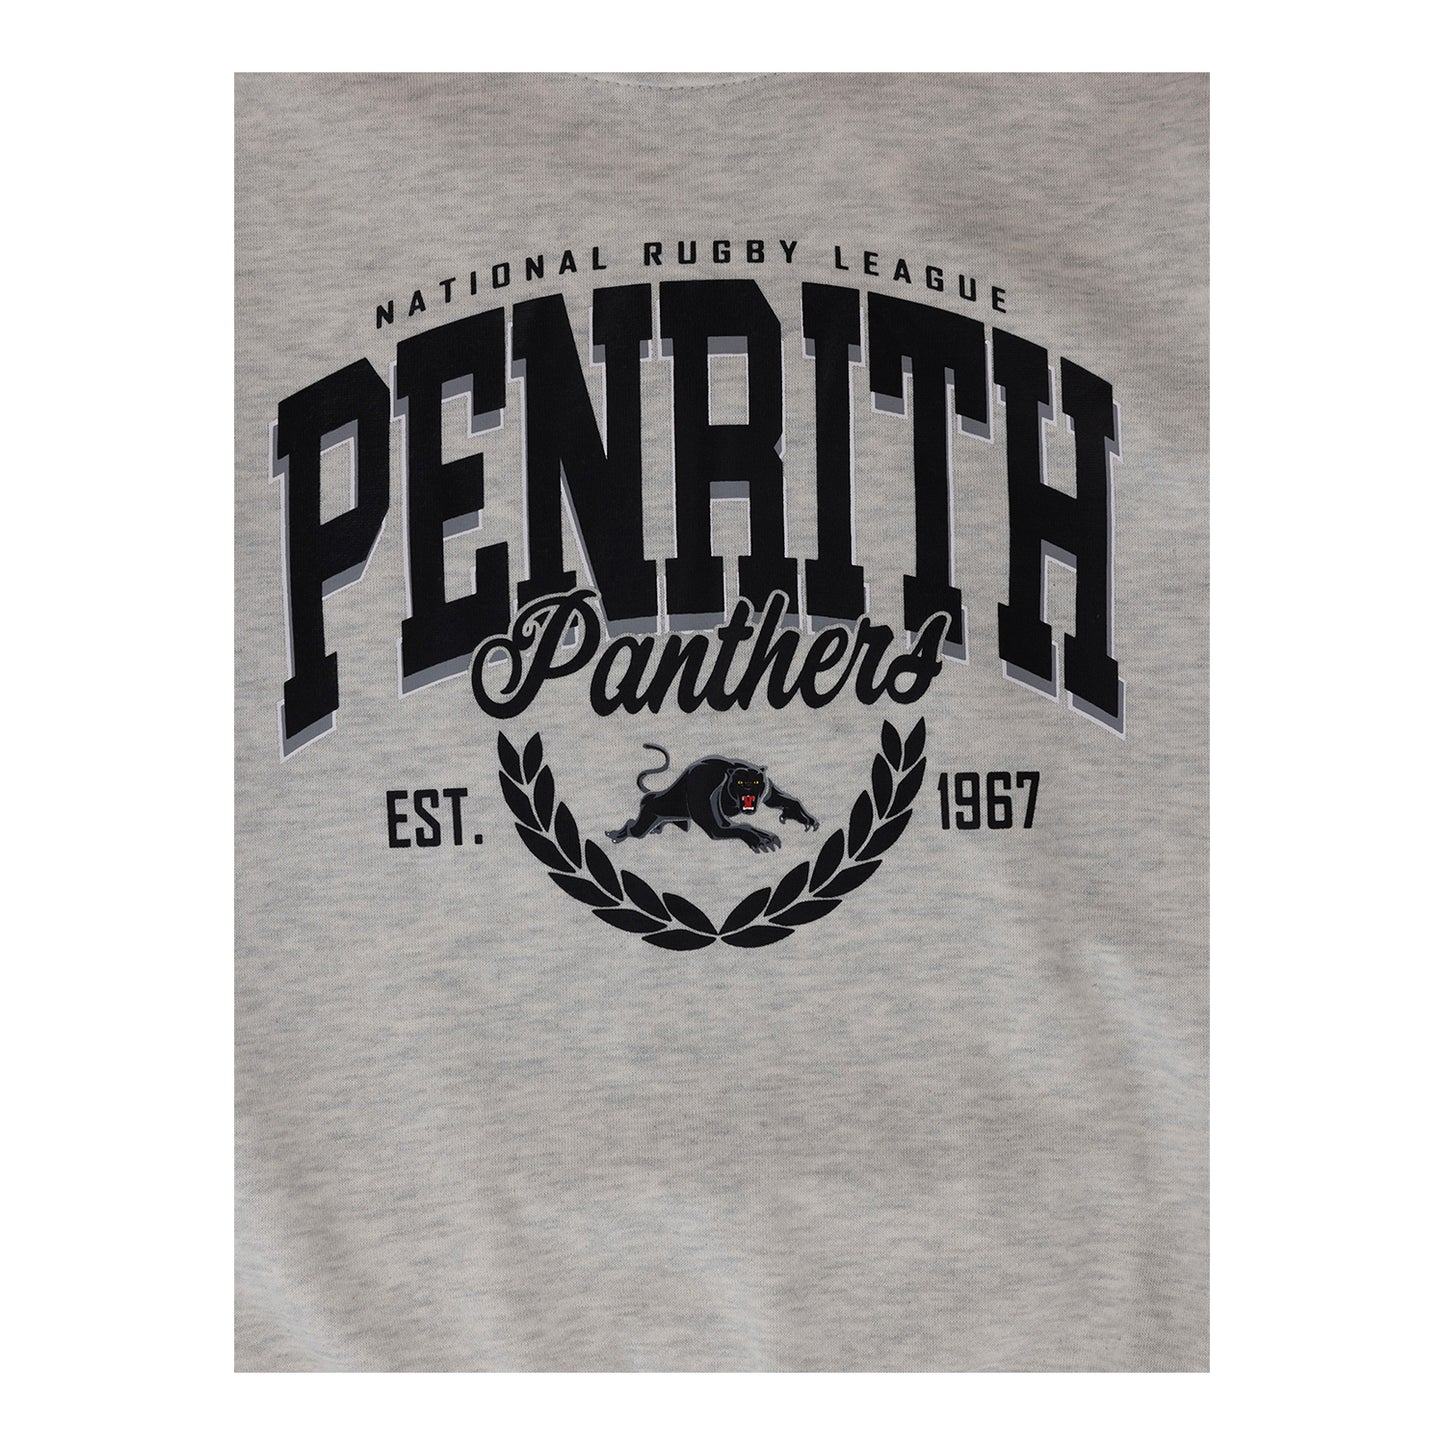 Penrith Panthers Womens Prep Crew Neck